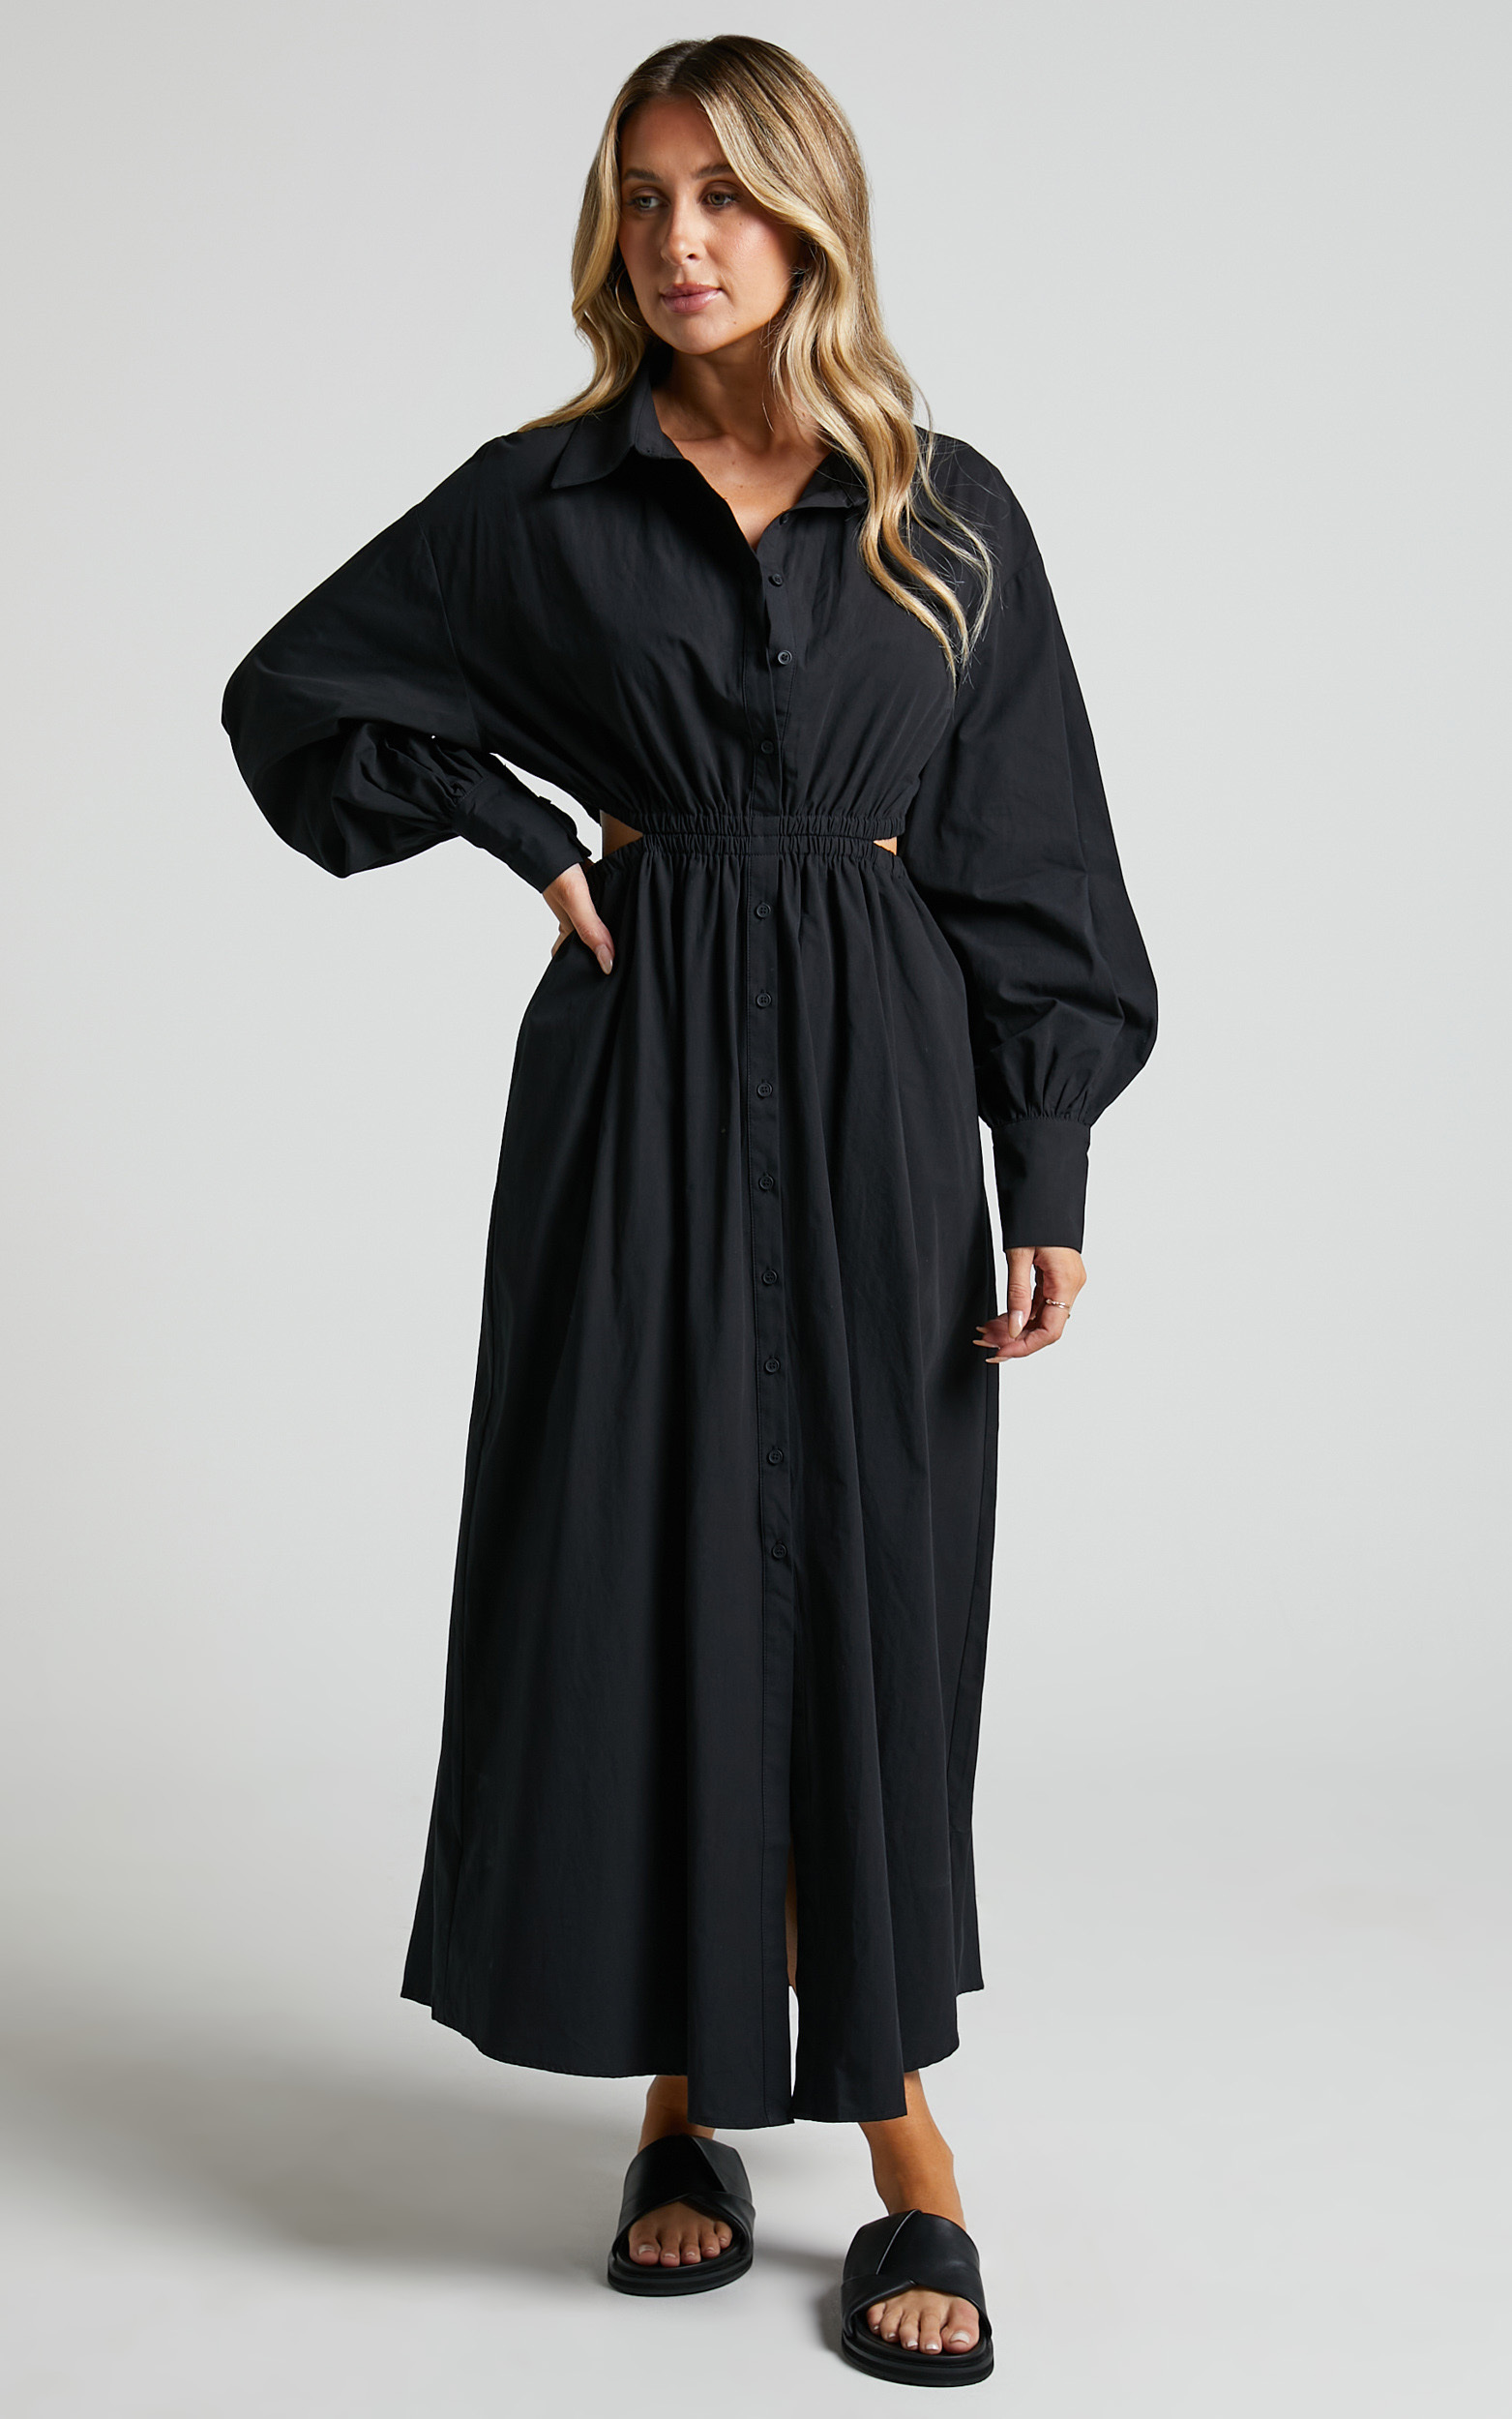 Merabelle Midi Dress - Side Cut Out Collared Long Sleeve Shirt Dress in Black - 10, BLK1, hi-res image number null